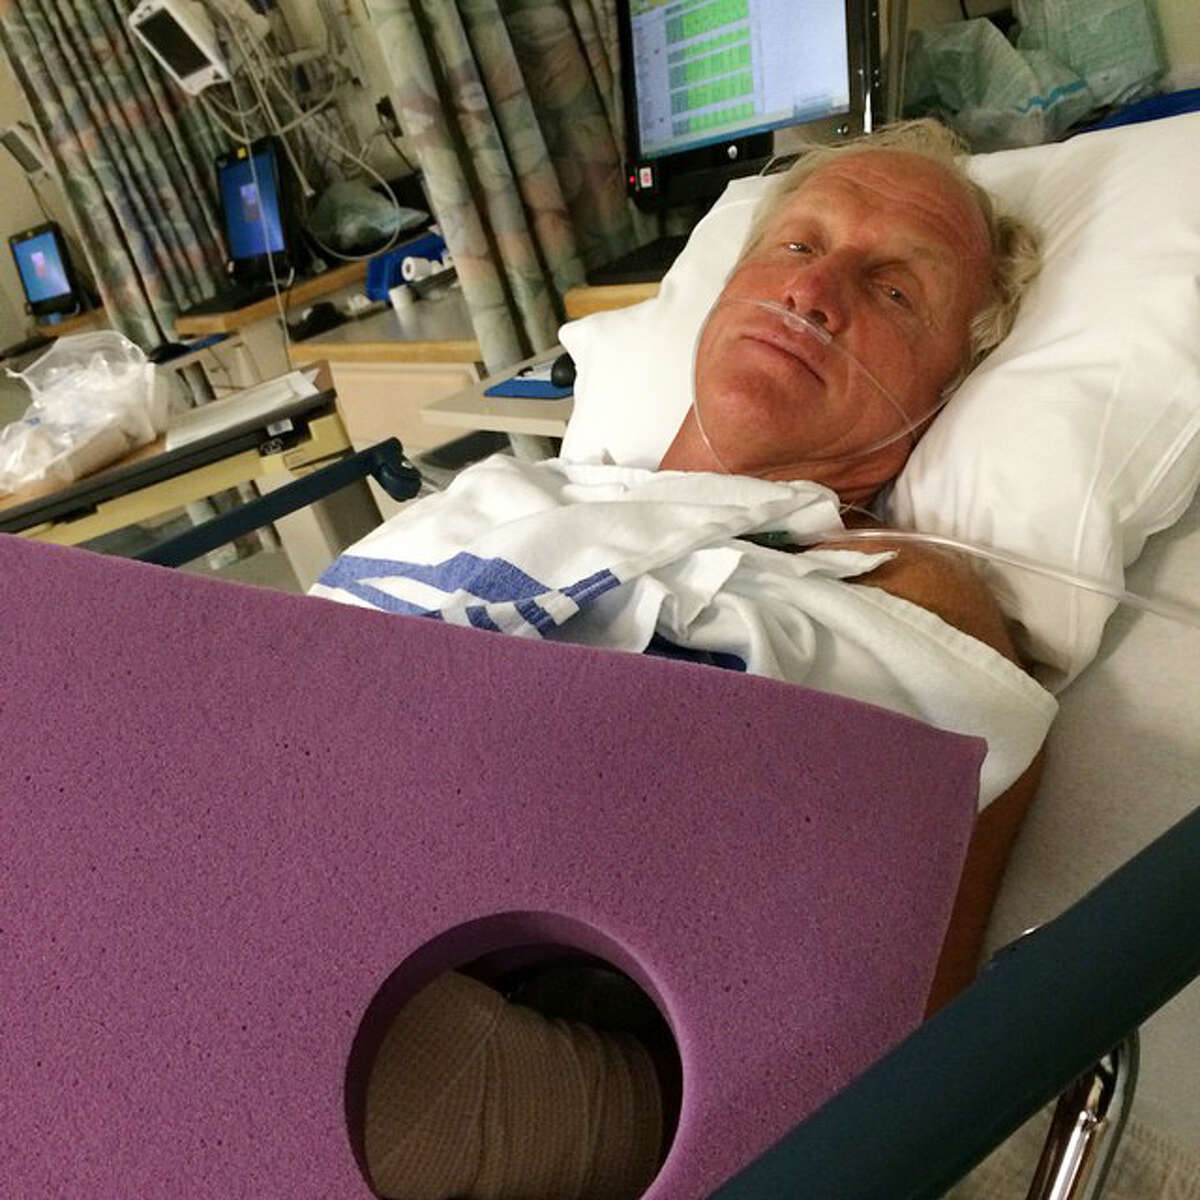 This photo provided by Greg Norman shows Norman resting in a hospital bed after a chainsaw accident.